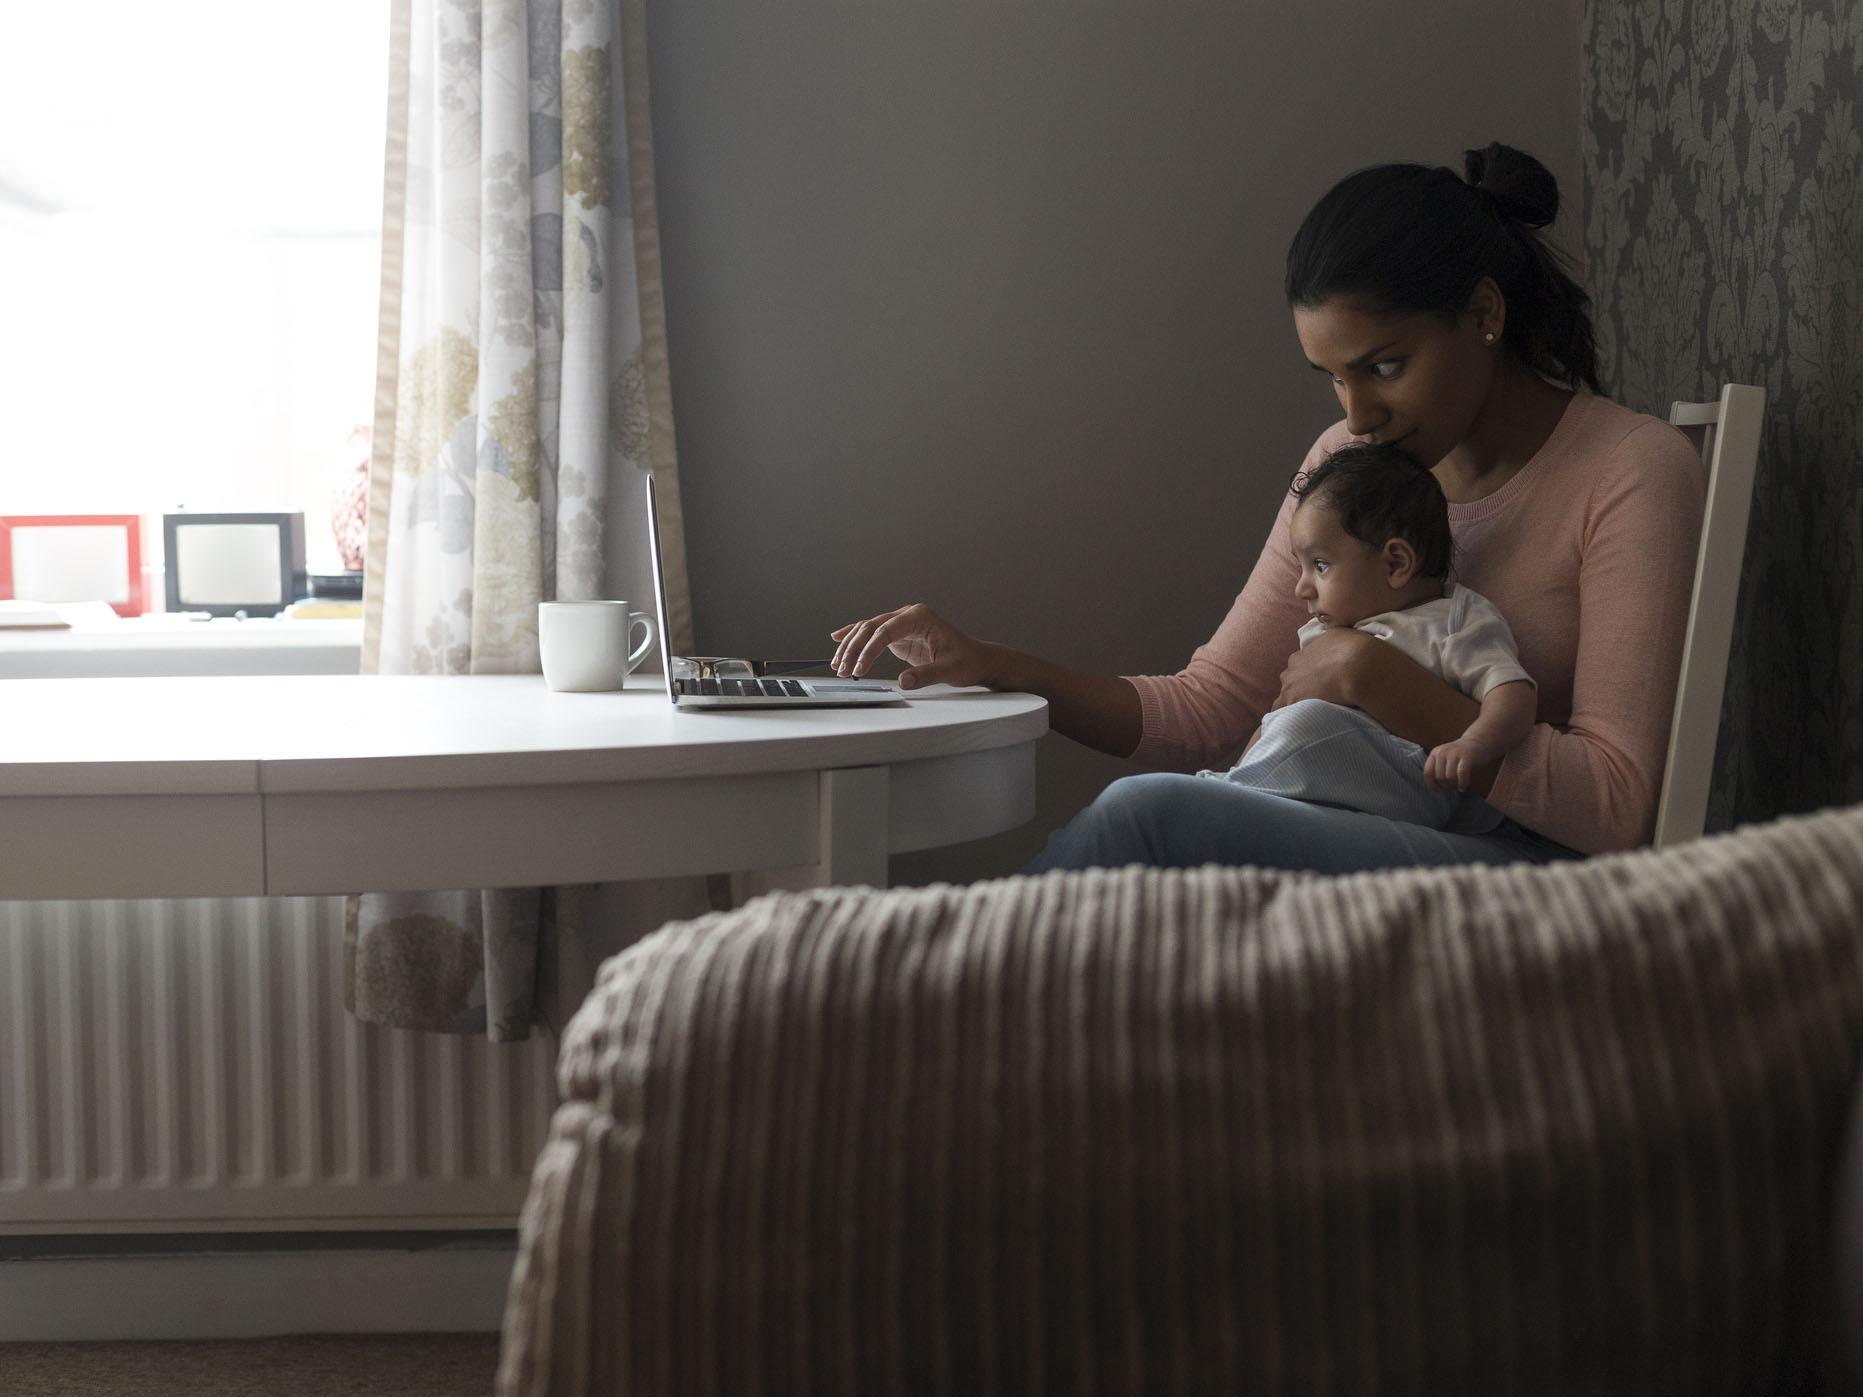 Policy reform for working mothers is long overdue, says Joanna Hunt